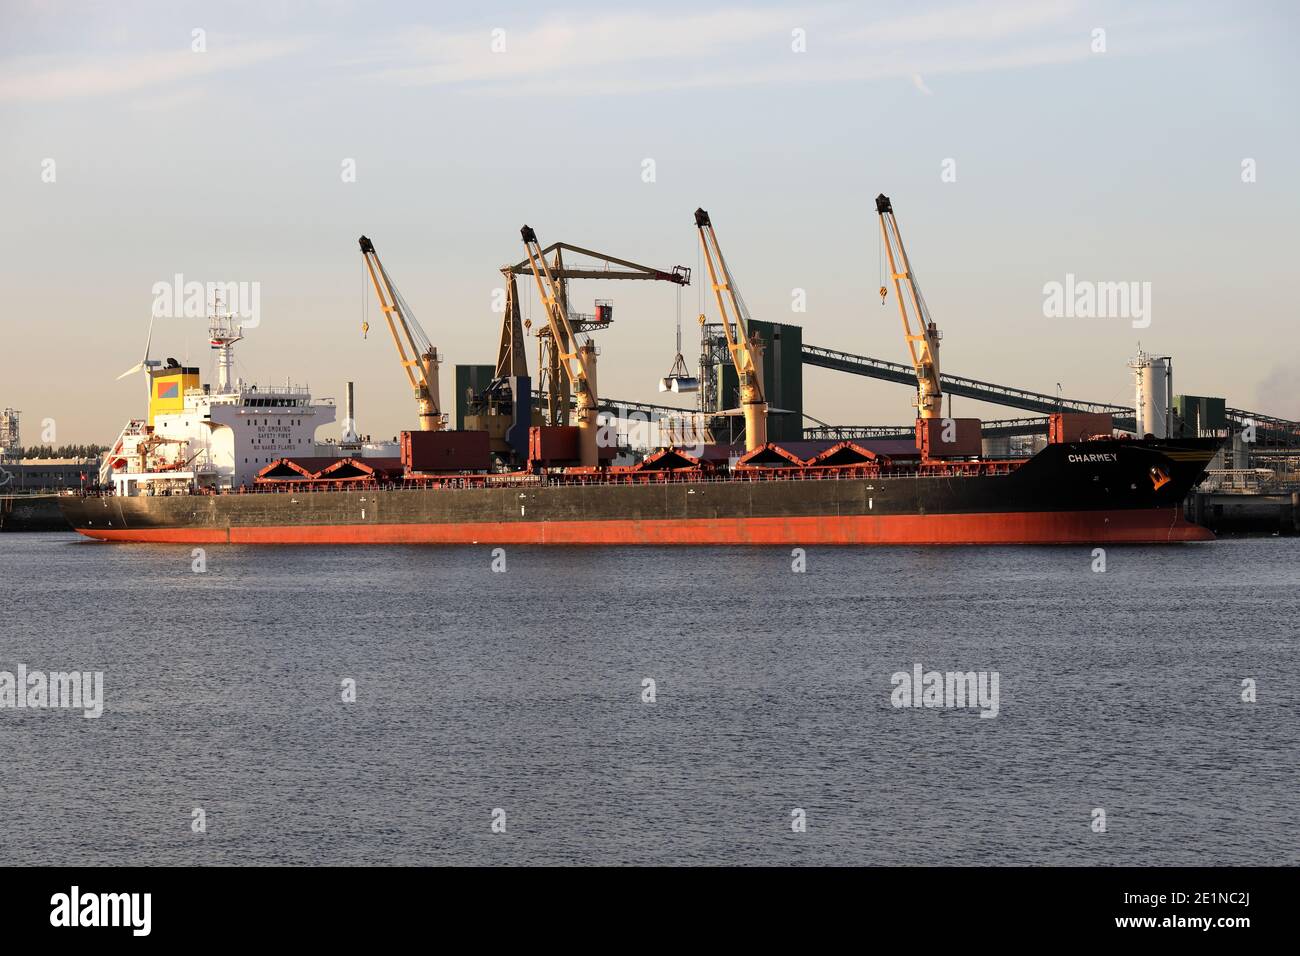 The bulk carrier Charmey will be unloaded in the port of Rotterdam on September 18, 2020. Stock Photo